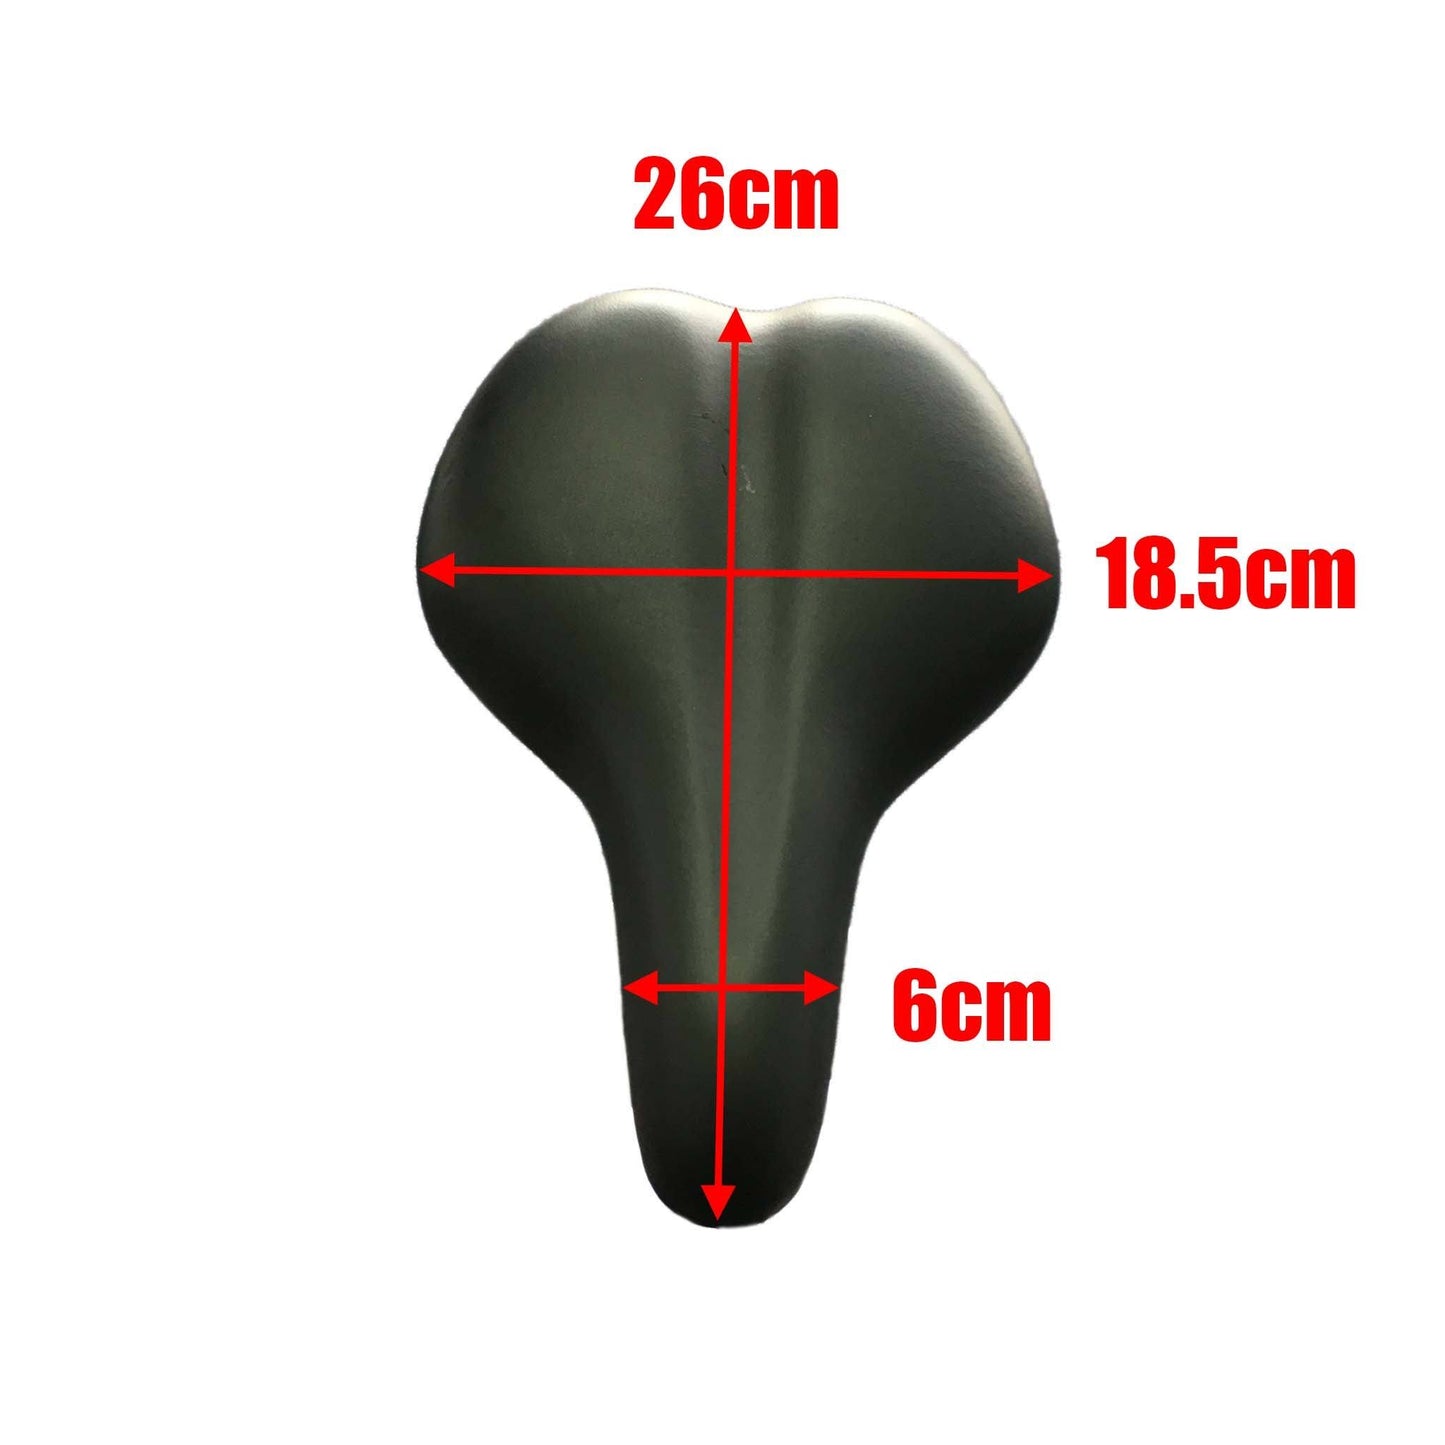 27mm Black Universal Fit Foldable Bicycle Seat For Best Comfort - TDRMOTO